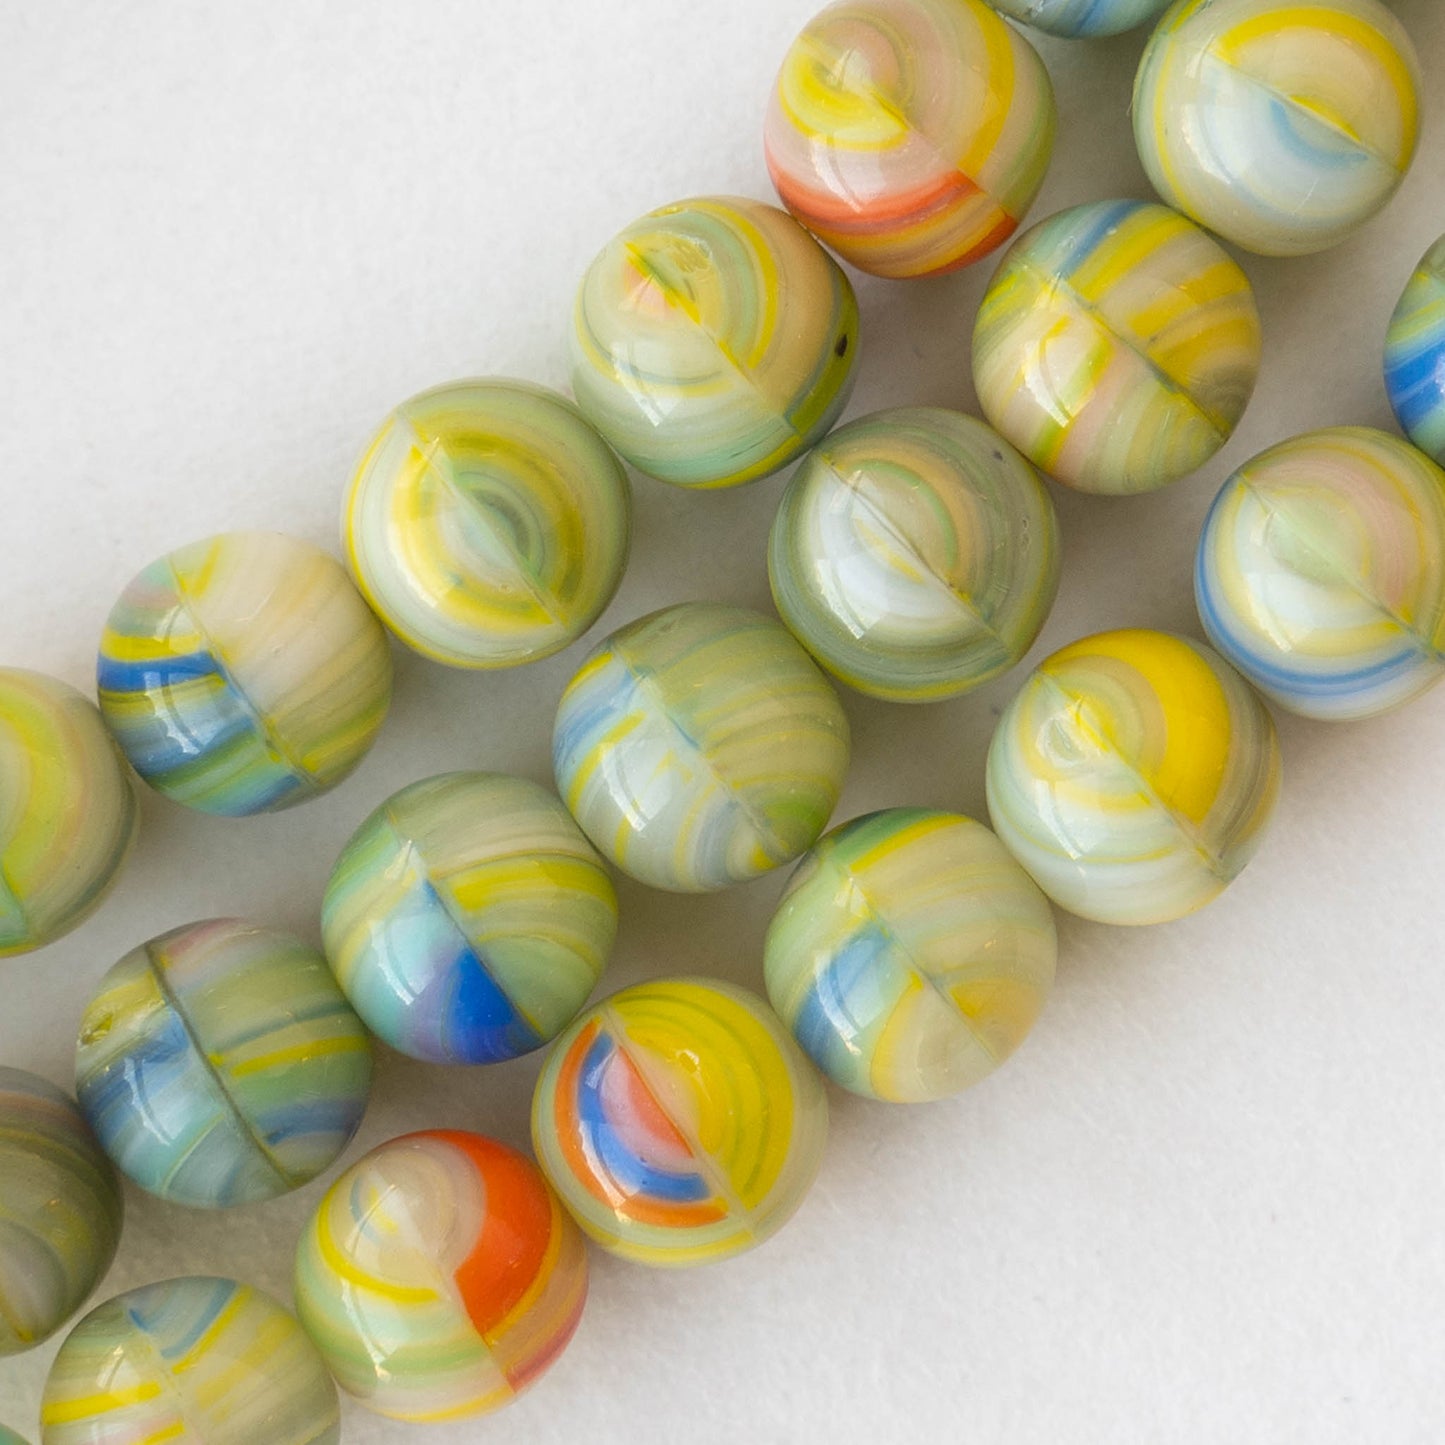 10x Marble Beads, Marble Glass Beads 8mm Orange and White Marble Beads,  Spacer Beads, Beading Supplies 